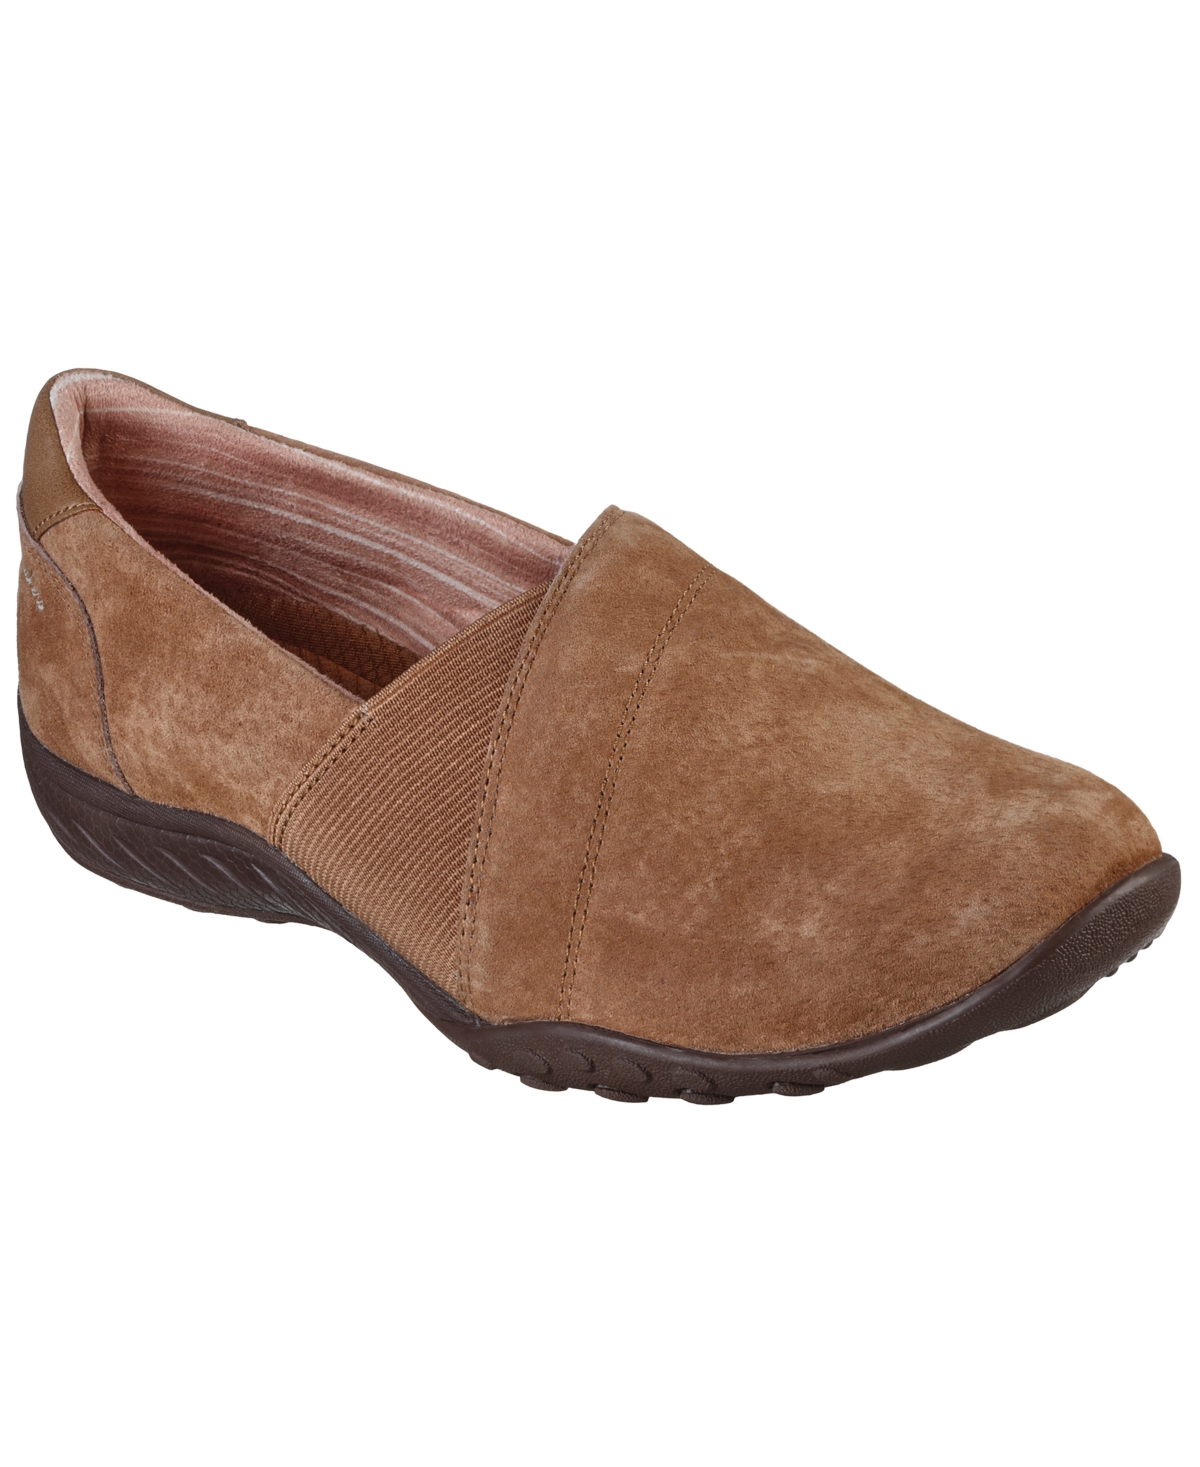 Women's Relaxed Fit: Breathe-Easy - Kindred Slip-On Casual Sneakers from Finish Line - Desert